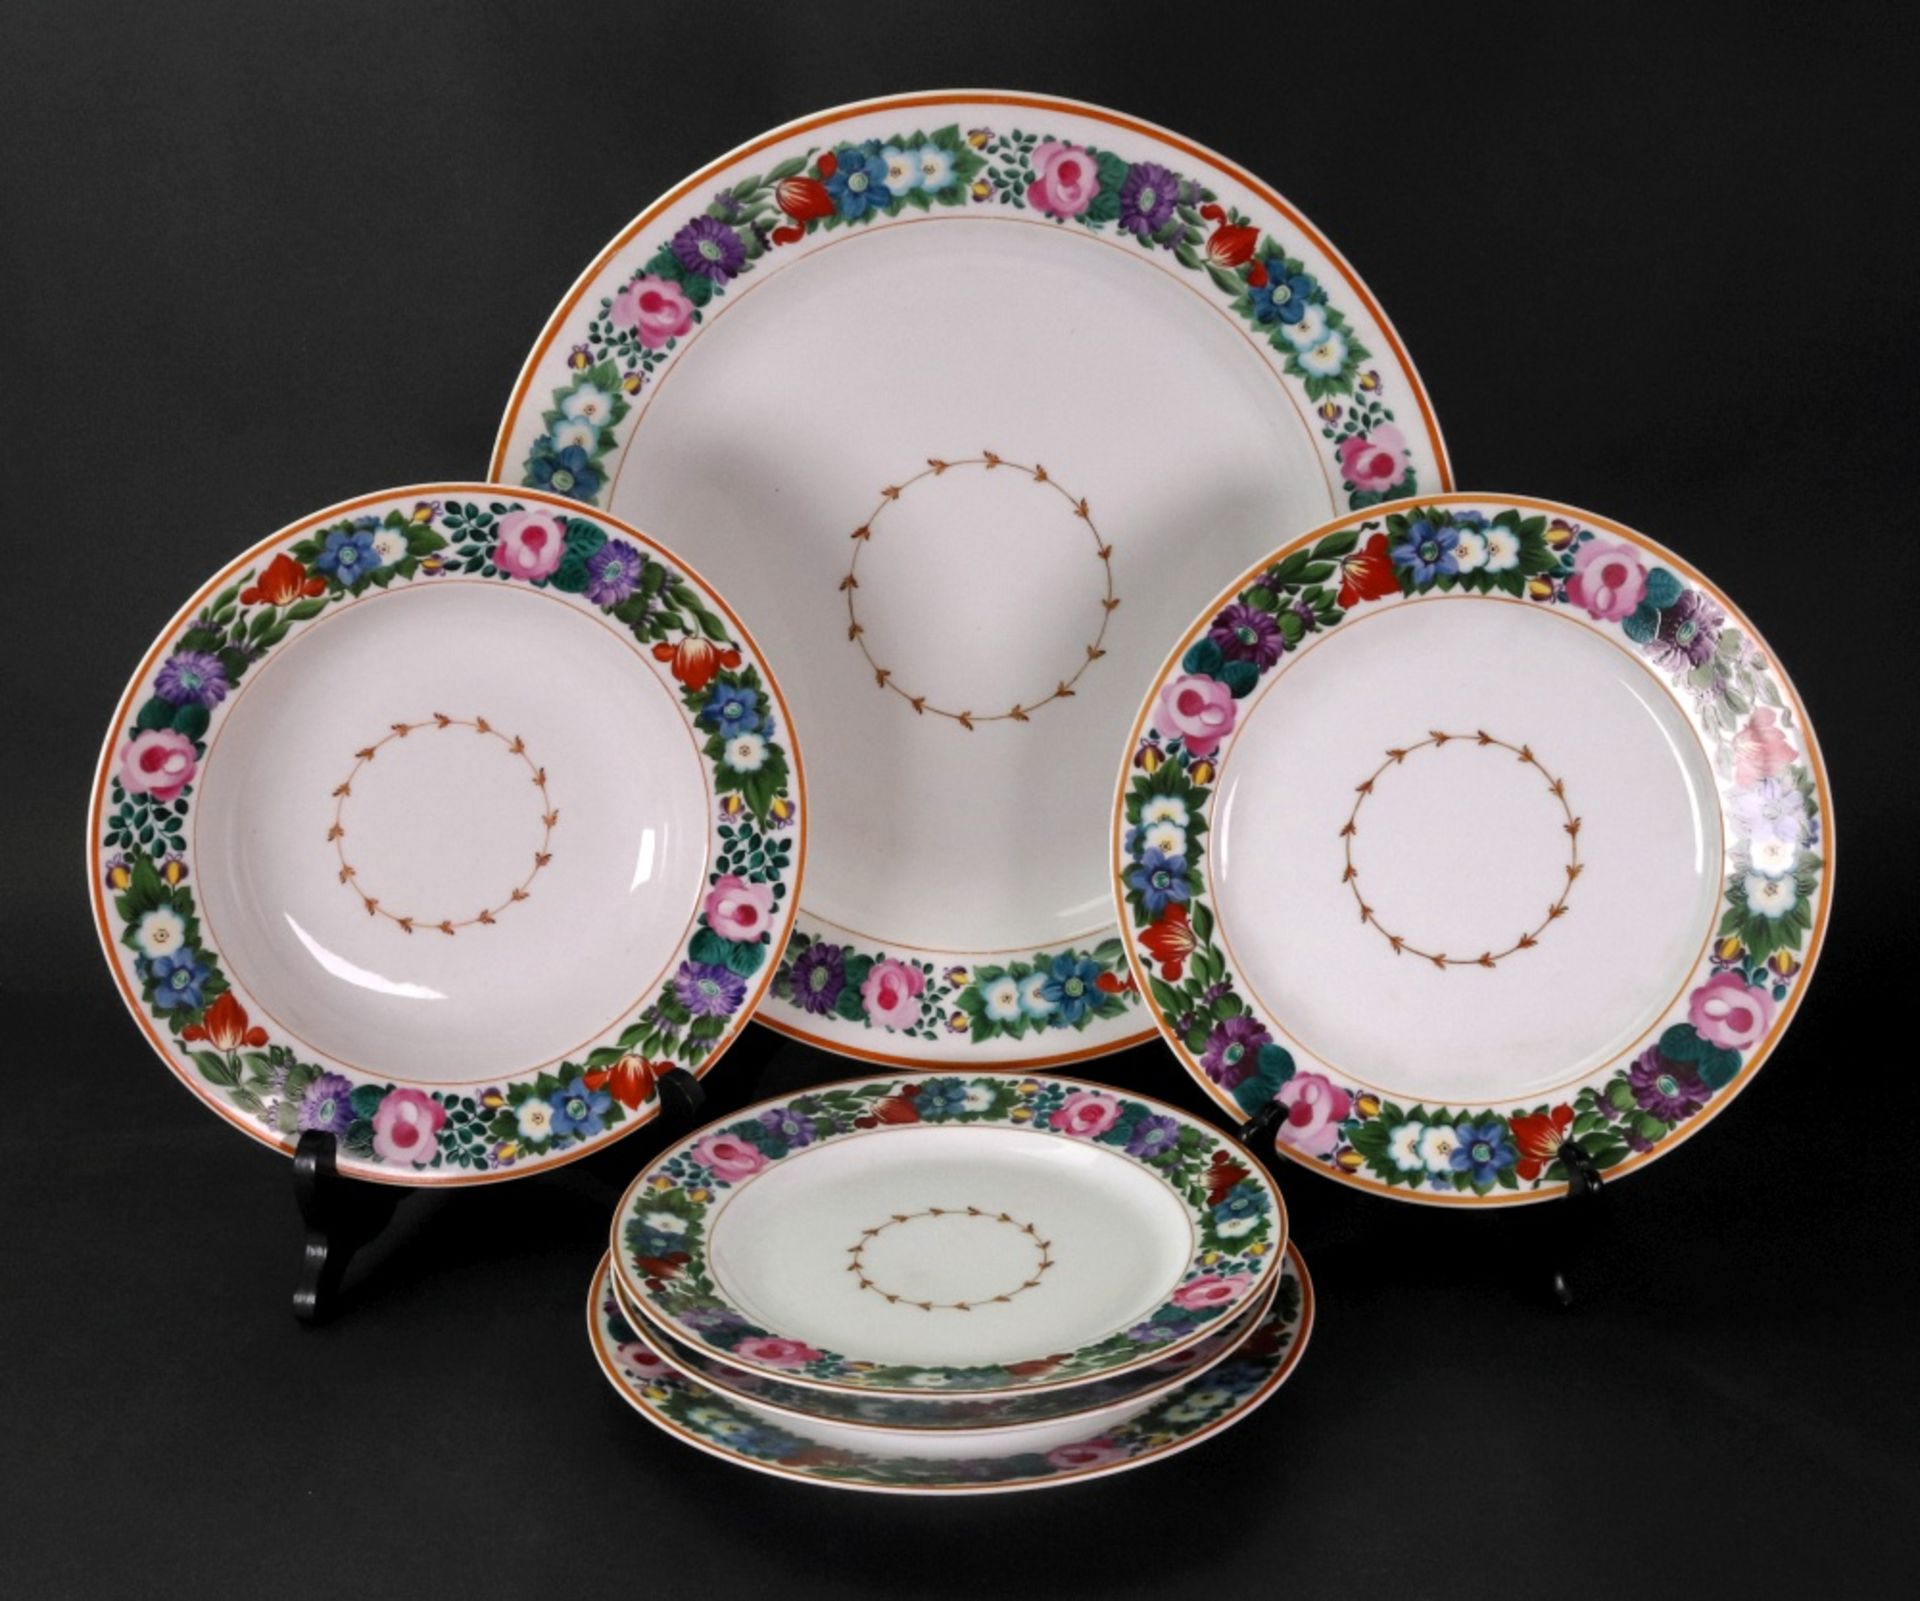 A large Russian circular bowl, a smaller bowl and four plates,